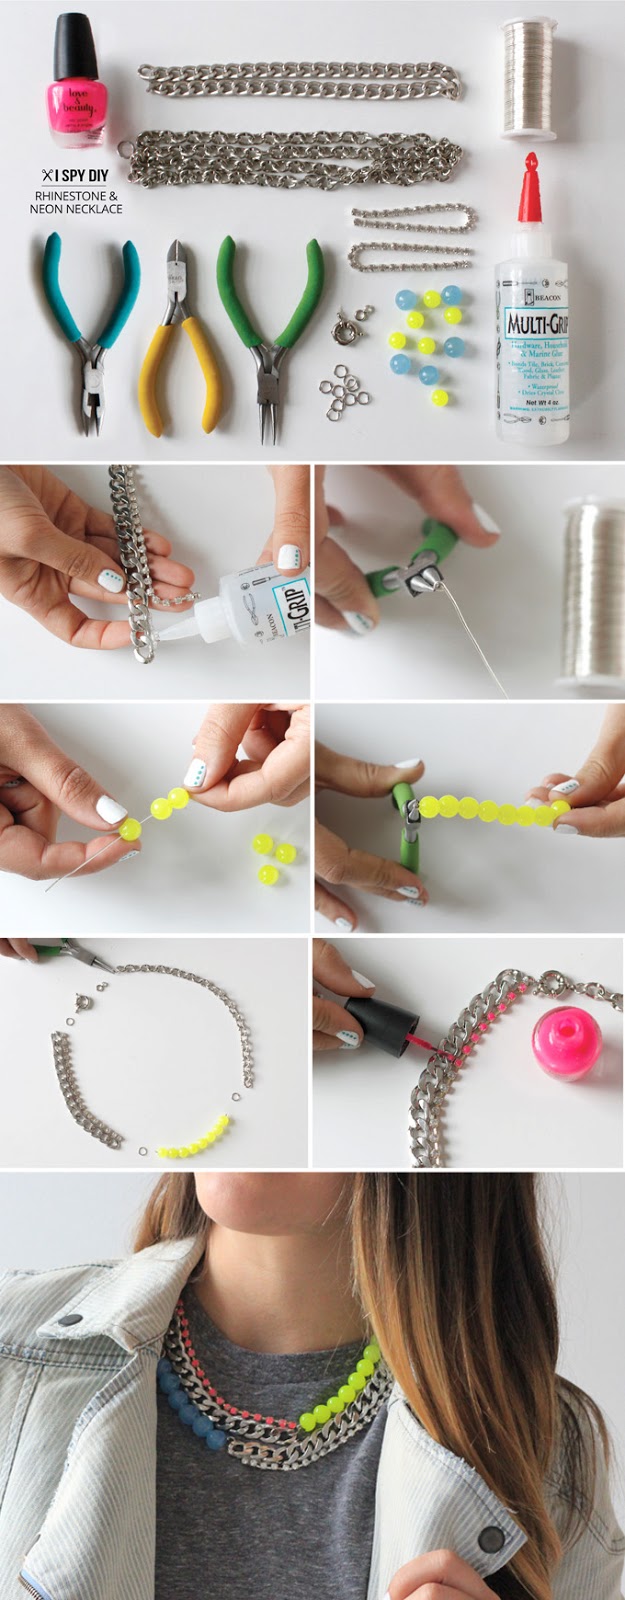 Step by Step Tutorial for Jewelry Making